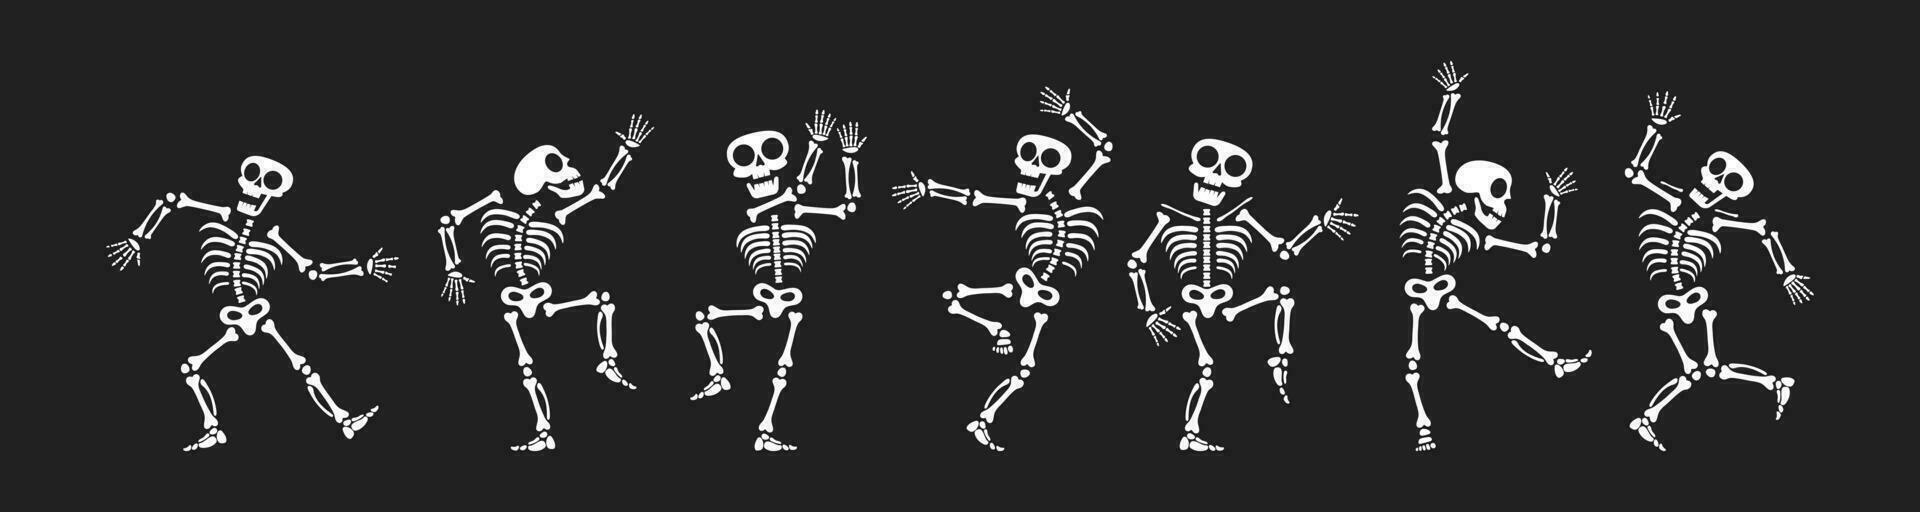 Skeletons dancing with different positions flat style design vector illustration set.